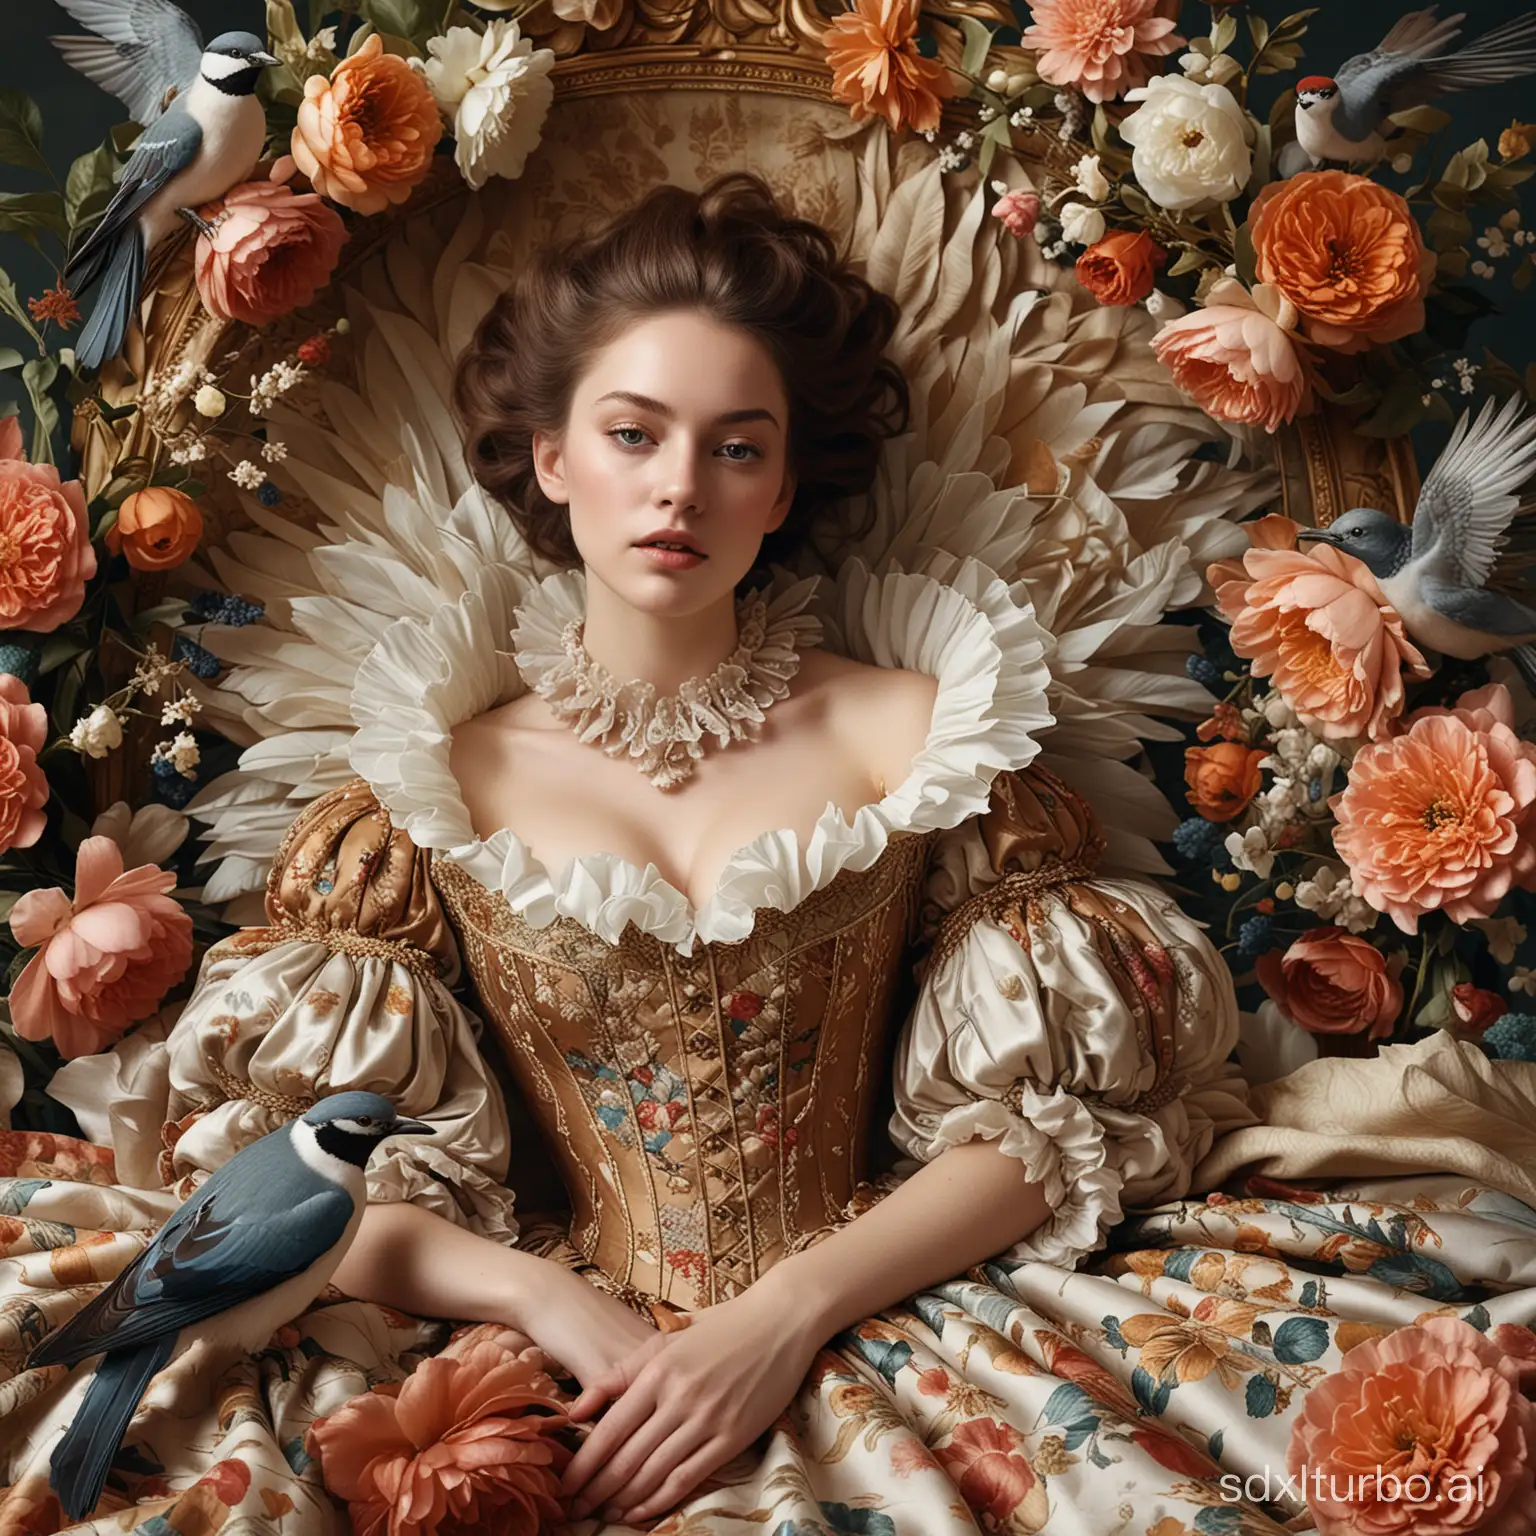 a beautiful and intricate image that seems to blend elements of classical art with a modern, almost surreal aesthetic. The central figure appears to be a woman, styled in a way reminiscent of the European Renaissance or Baroque periods, reclining with a serene, almost otherworldly expression. Her clothing and the ruff collar enhance this historical impression. Surrounding her are oversized flowers and a couple of birds in mid-flight, which add a touch of natural beauty and vitality. The colors are rich and earthy, and the level of detail in the textures, from the floral patterns on the fabric to the individual petals and feathers, is quite remarkable. This composition feels both timeless and contemporary, inviting viewers into a moment of tranquil beauty. Realistic, 4:3